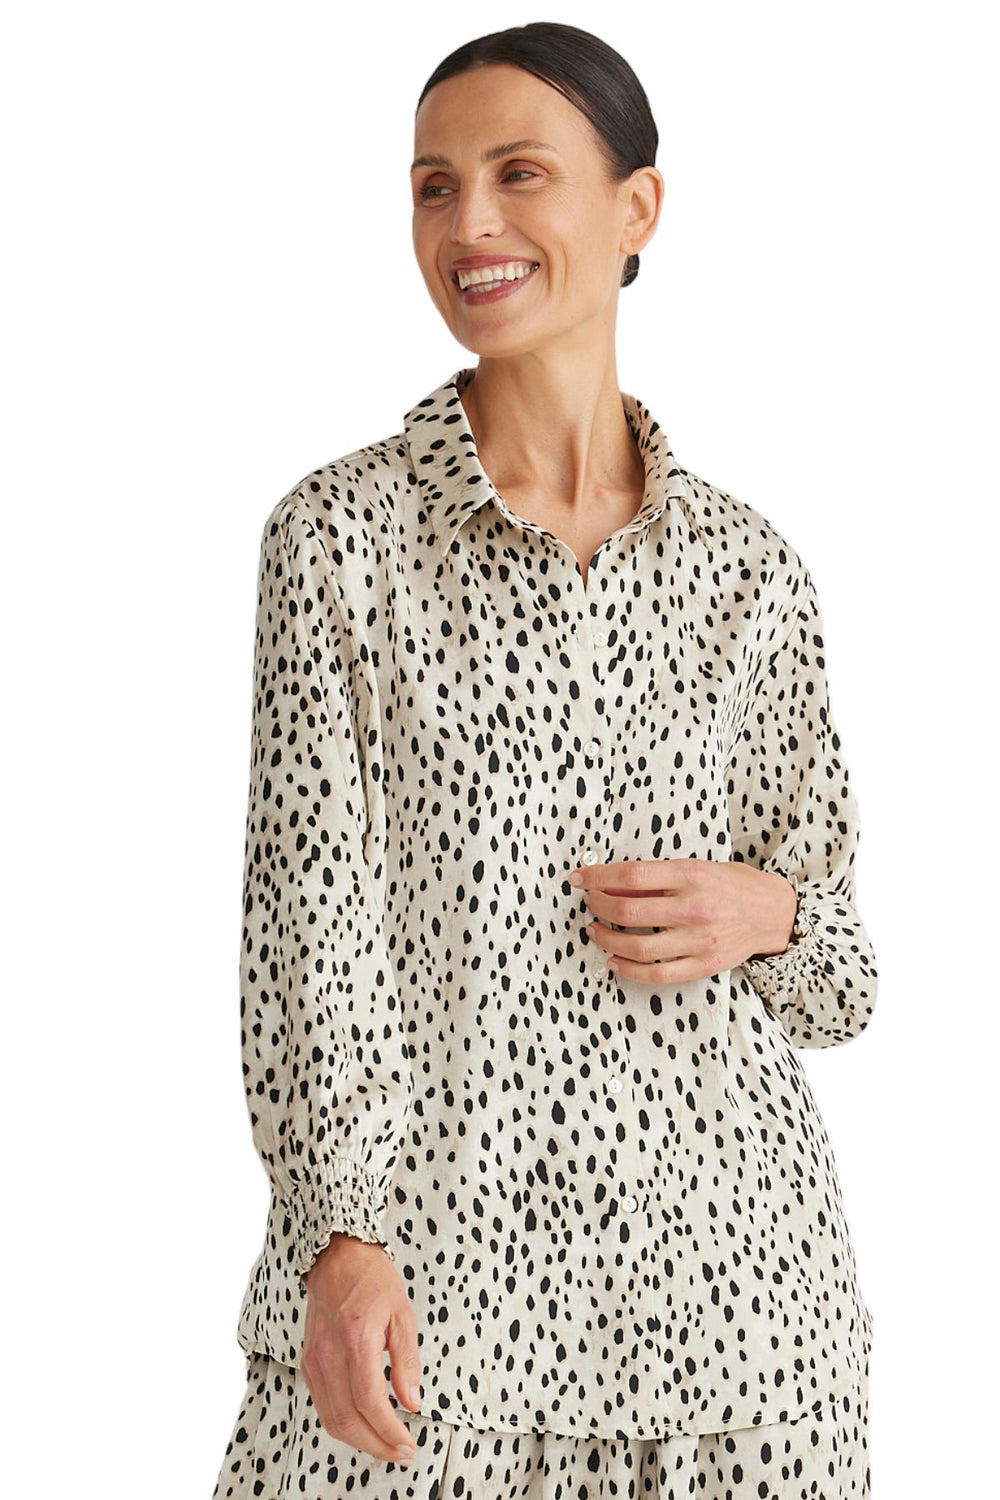 Audrey Shirt  Brand : Brave & True Style : BT6762-1 Fabric : 100% Polyester Print : Ocelot Cold delicate machine wash Classic shirt with collar and front placket Shirred cuff detail Easy wearing shirt true to size